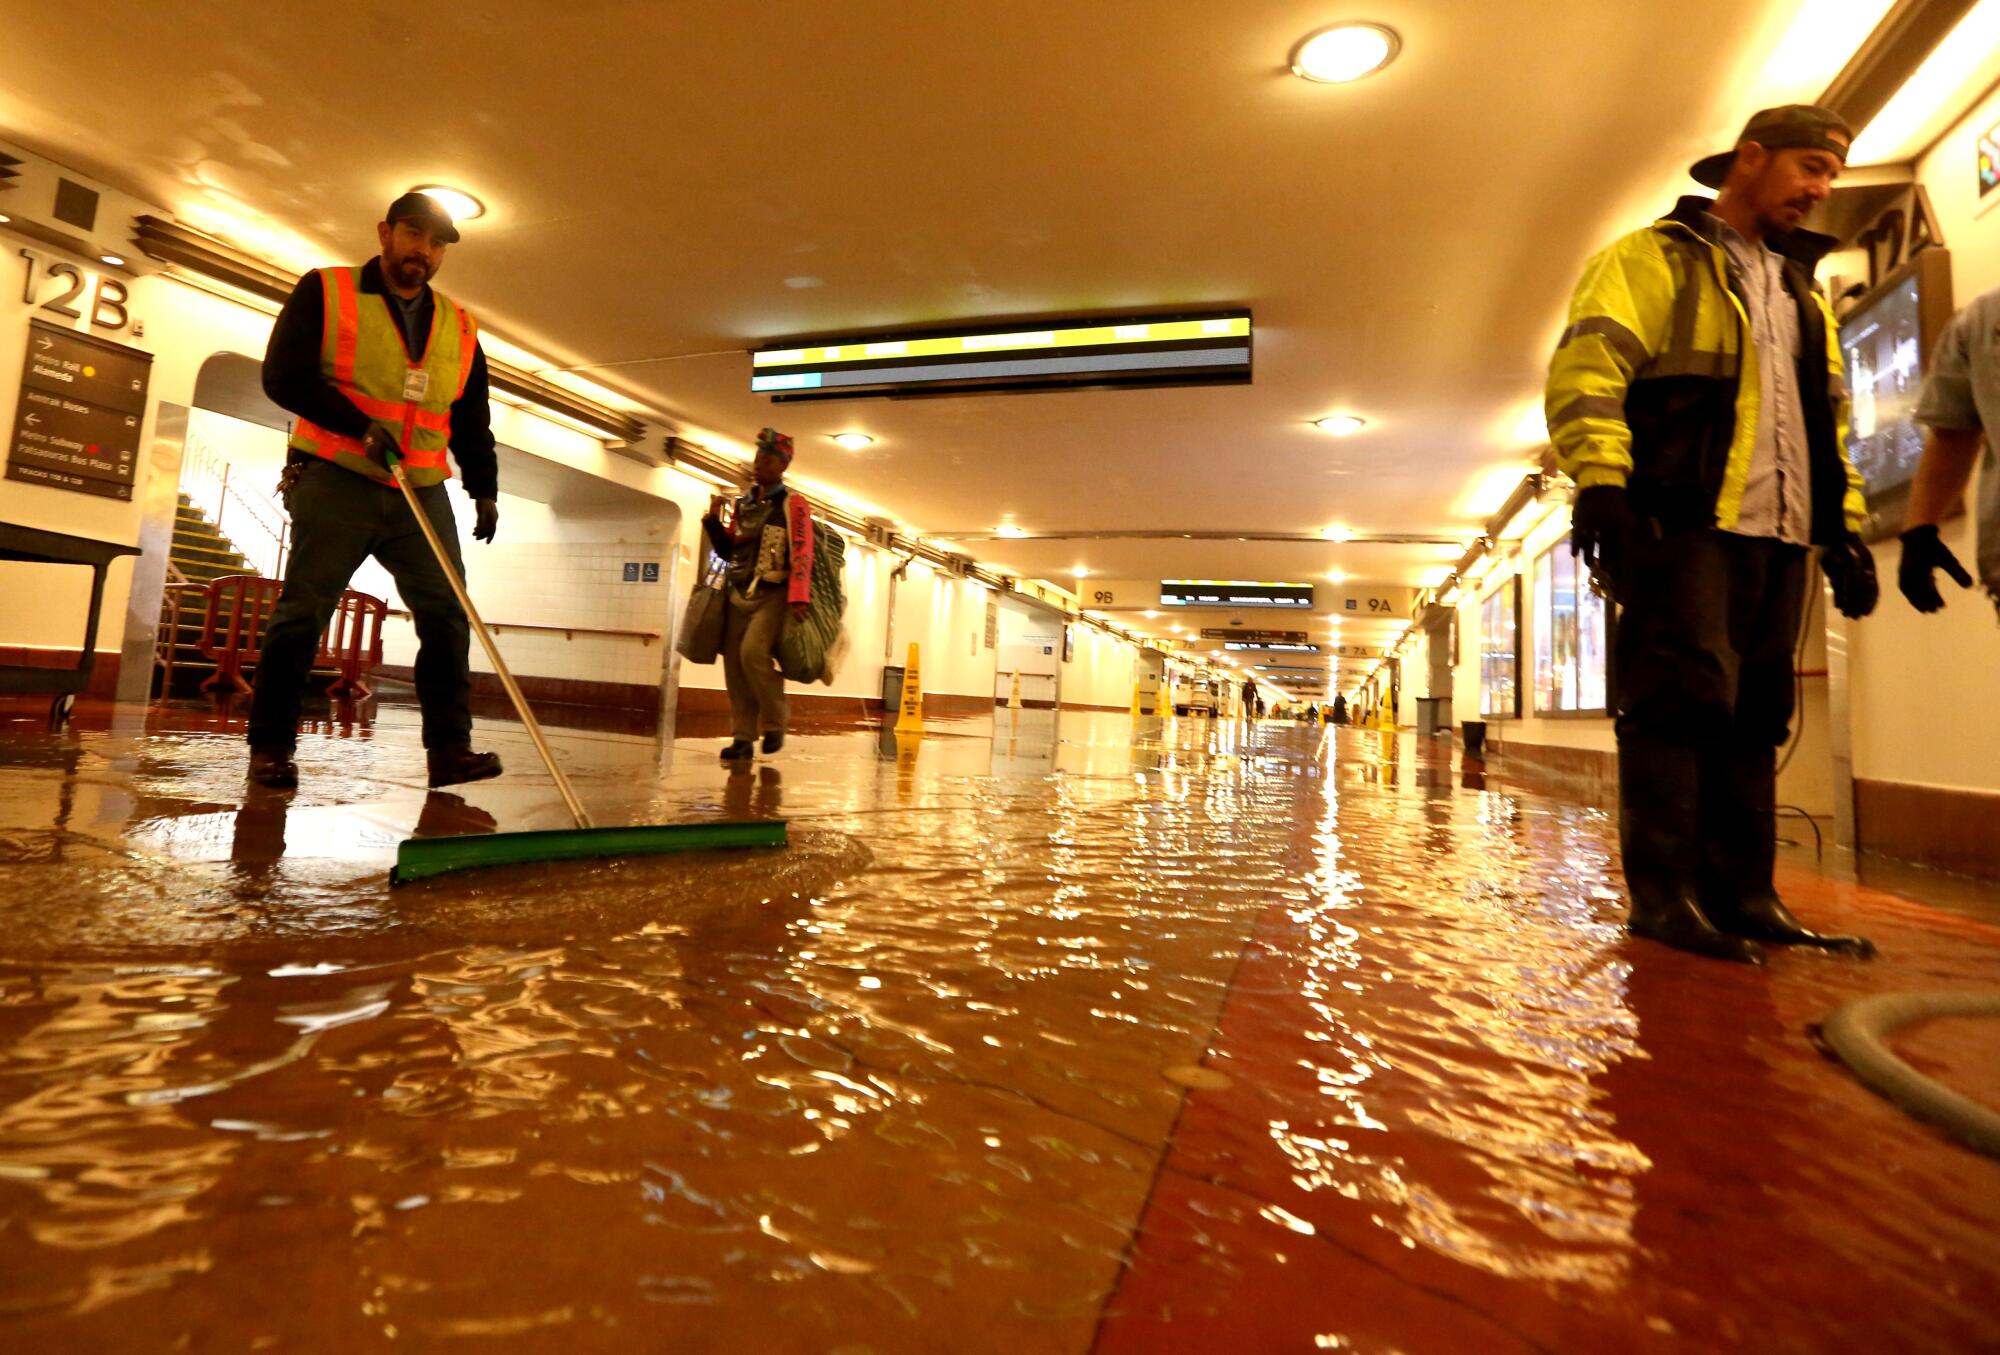 Workers brush floodwater in Union Station.